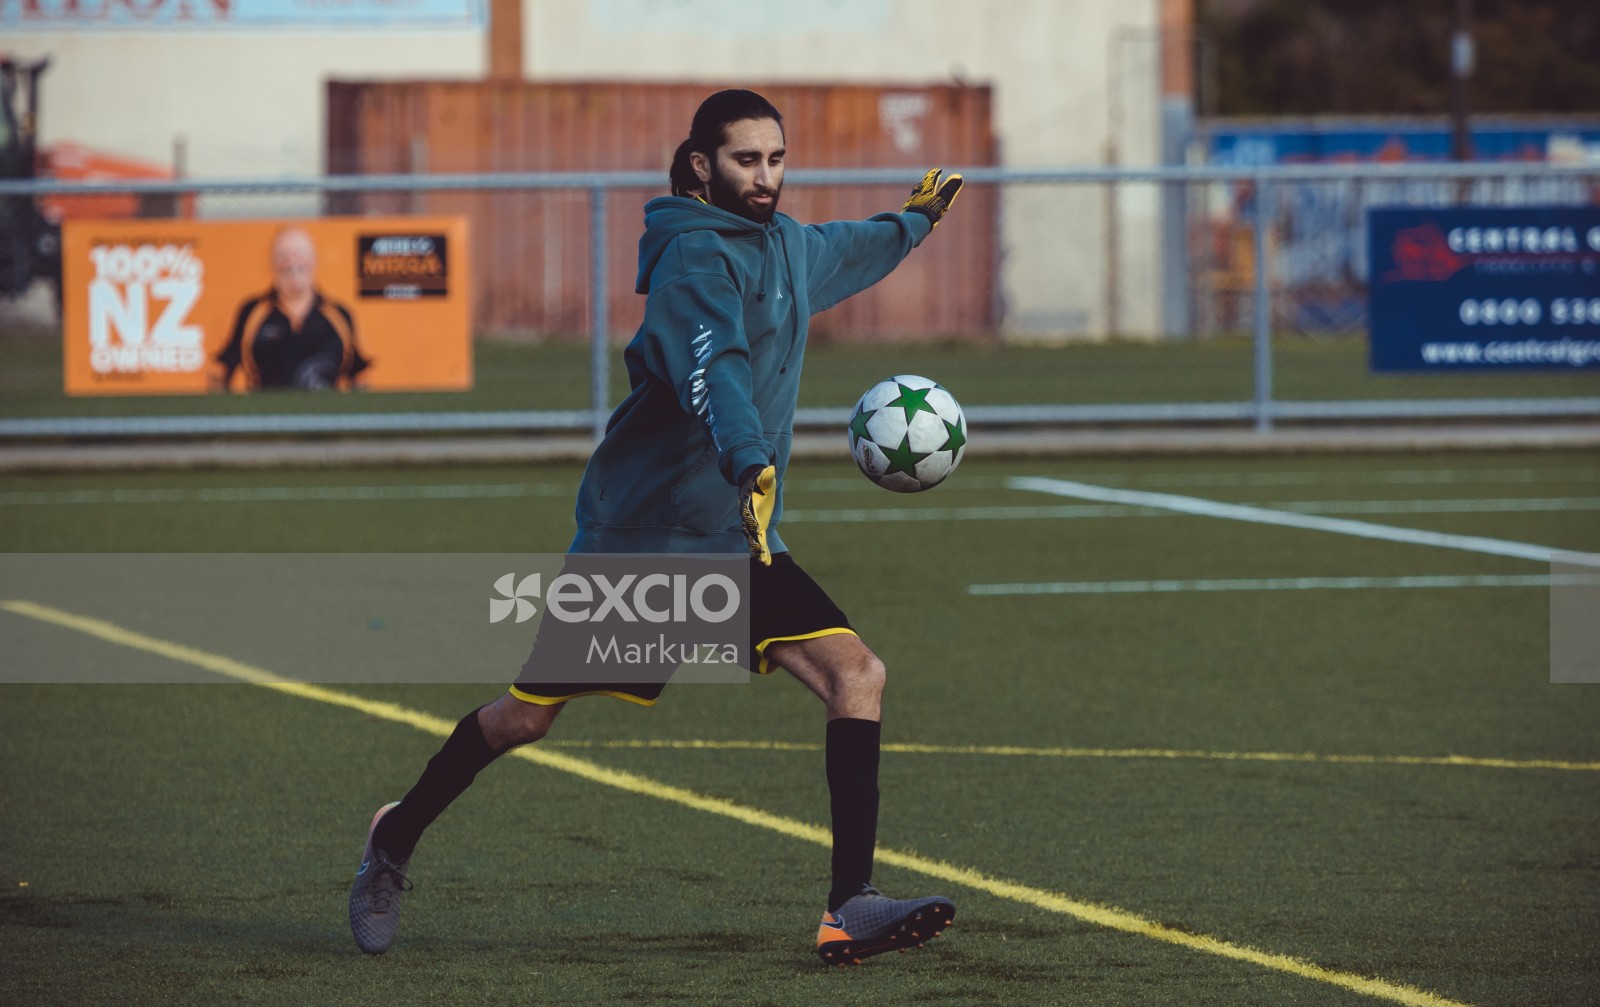 Goalkeeper with long hair and blue hoodie kicking ball - Sports Zone sunday league